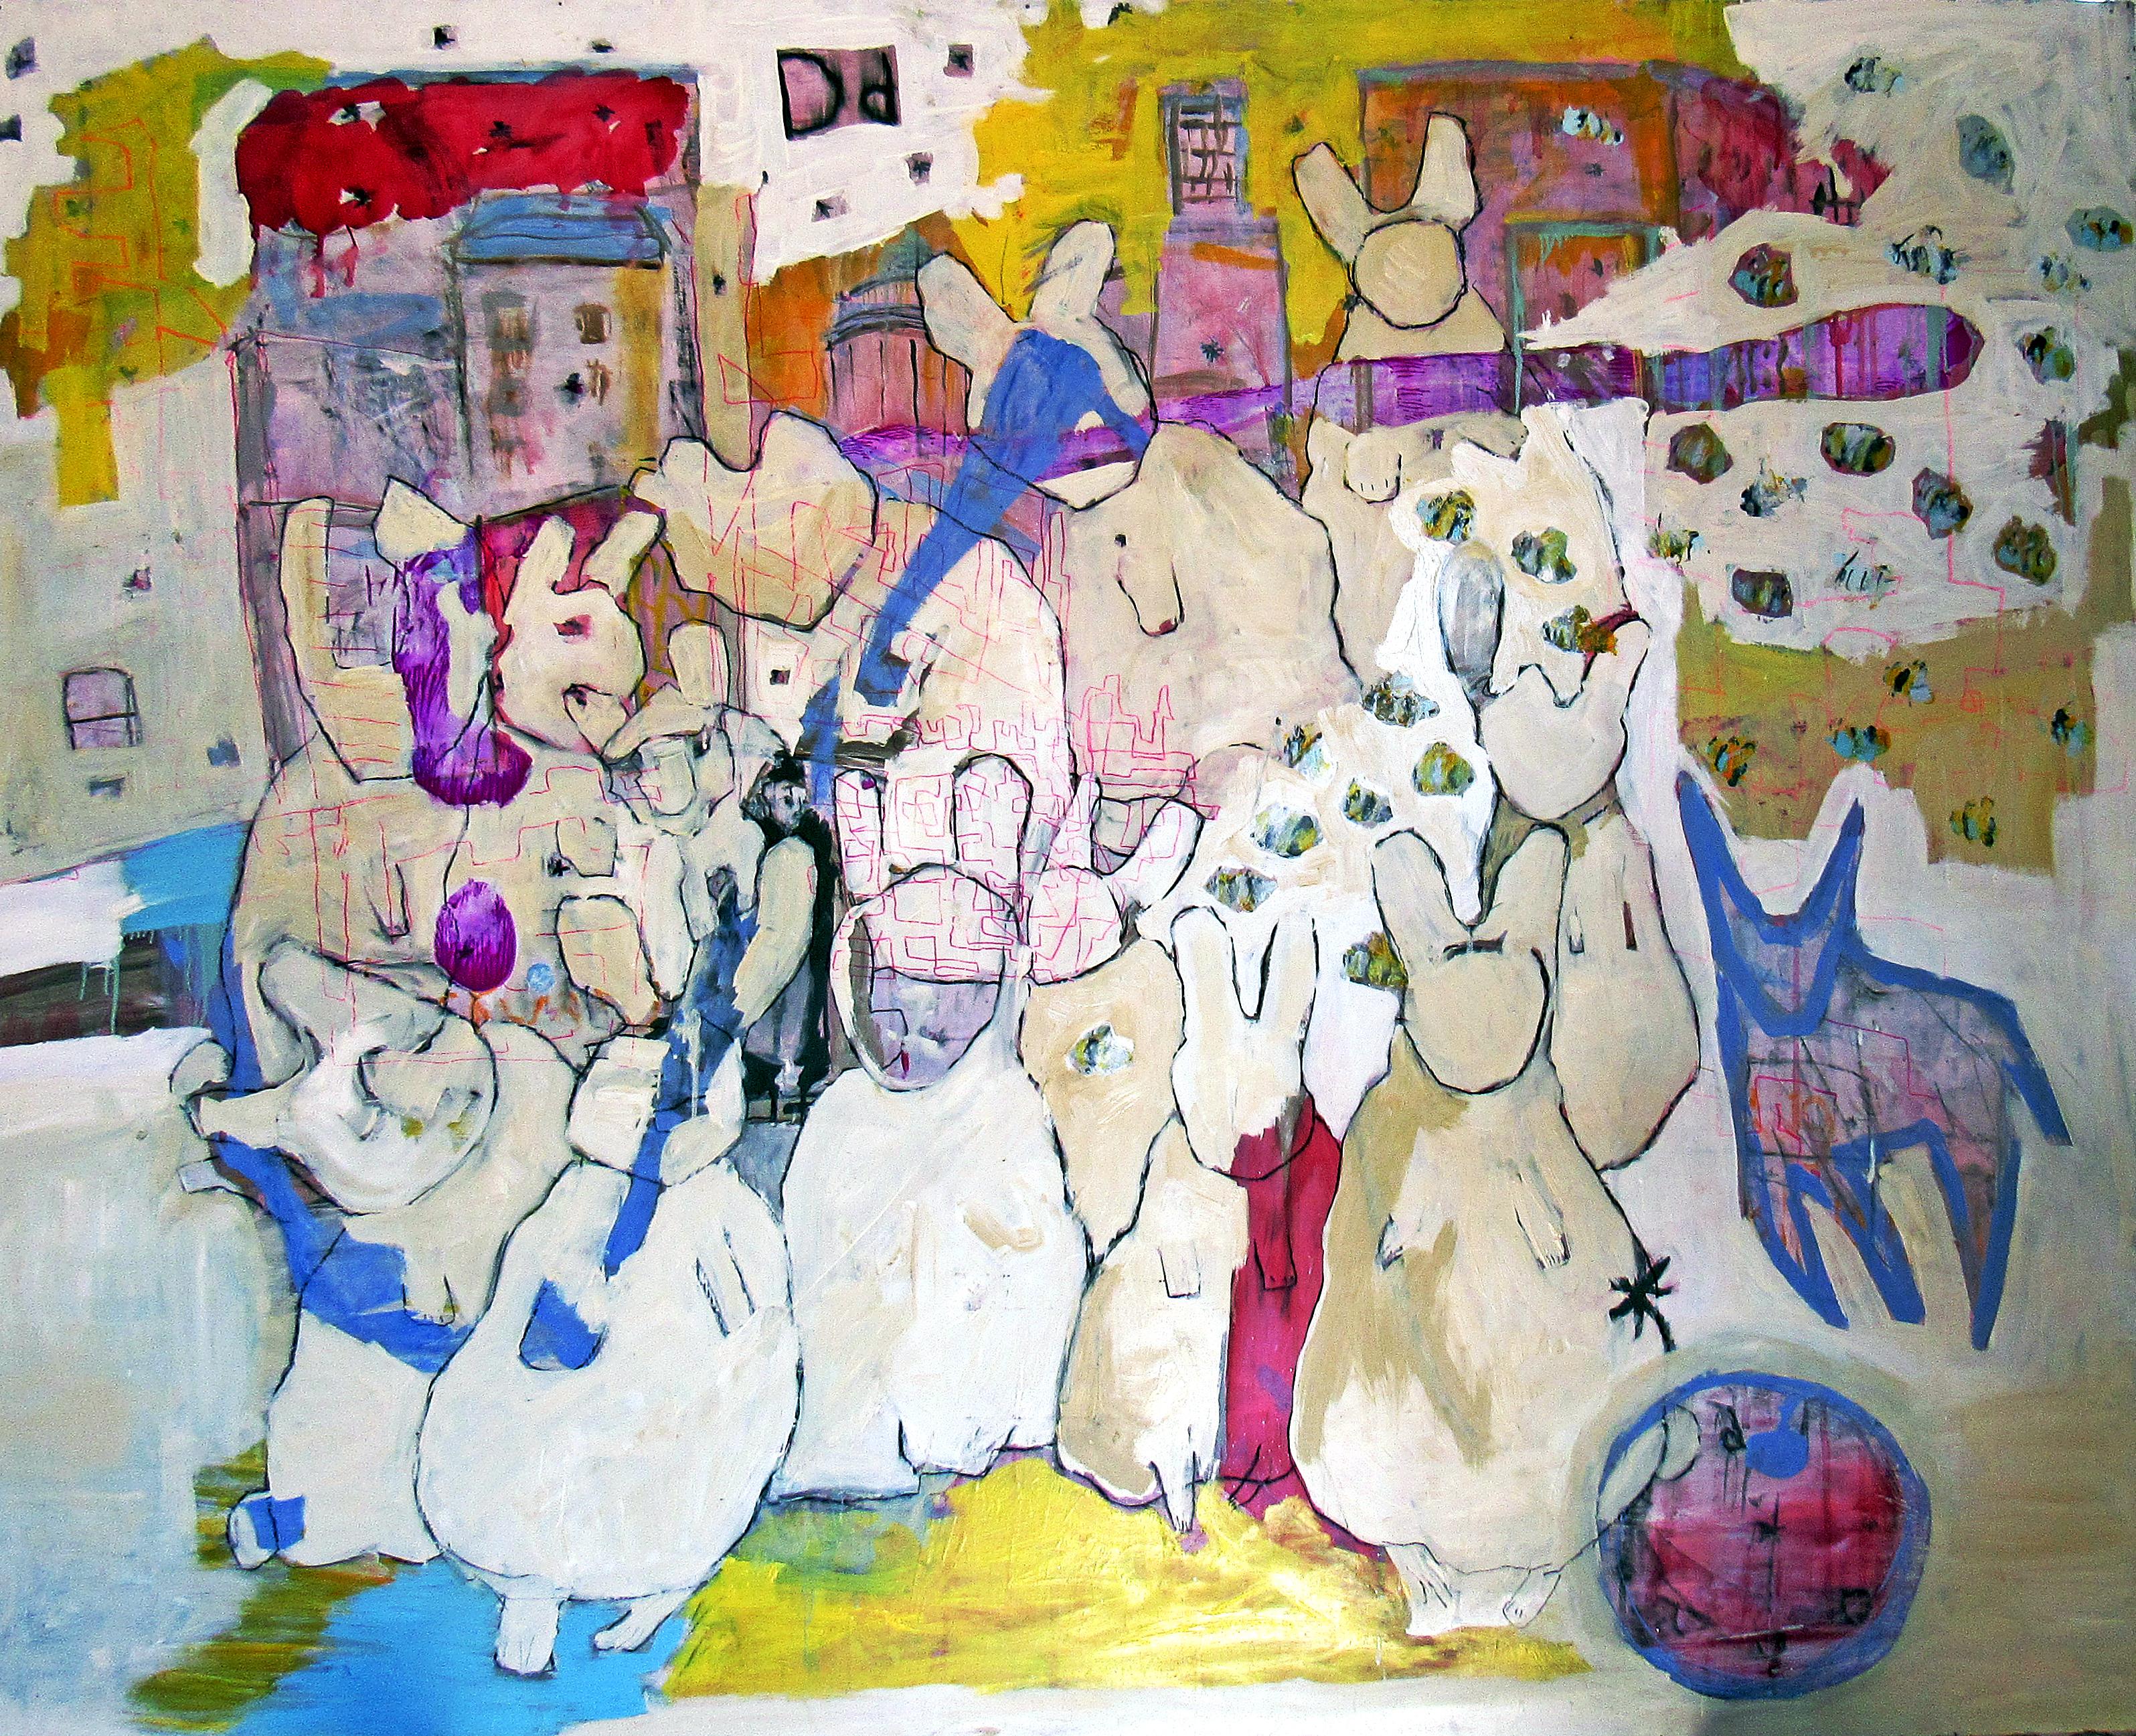 C. Dimitri Abstract Painting - ParisCommune, colorful iconographic abstract animals bunnies